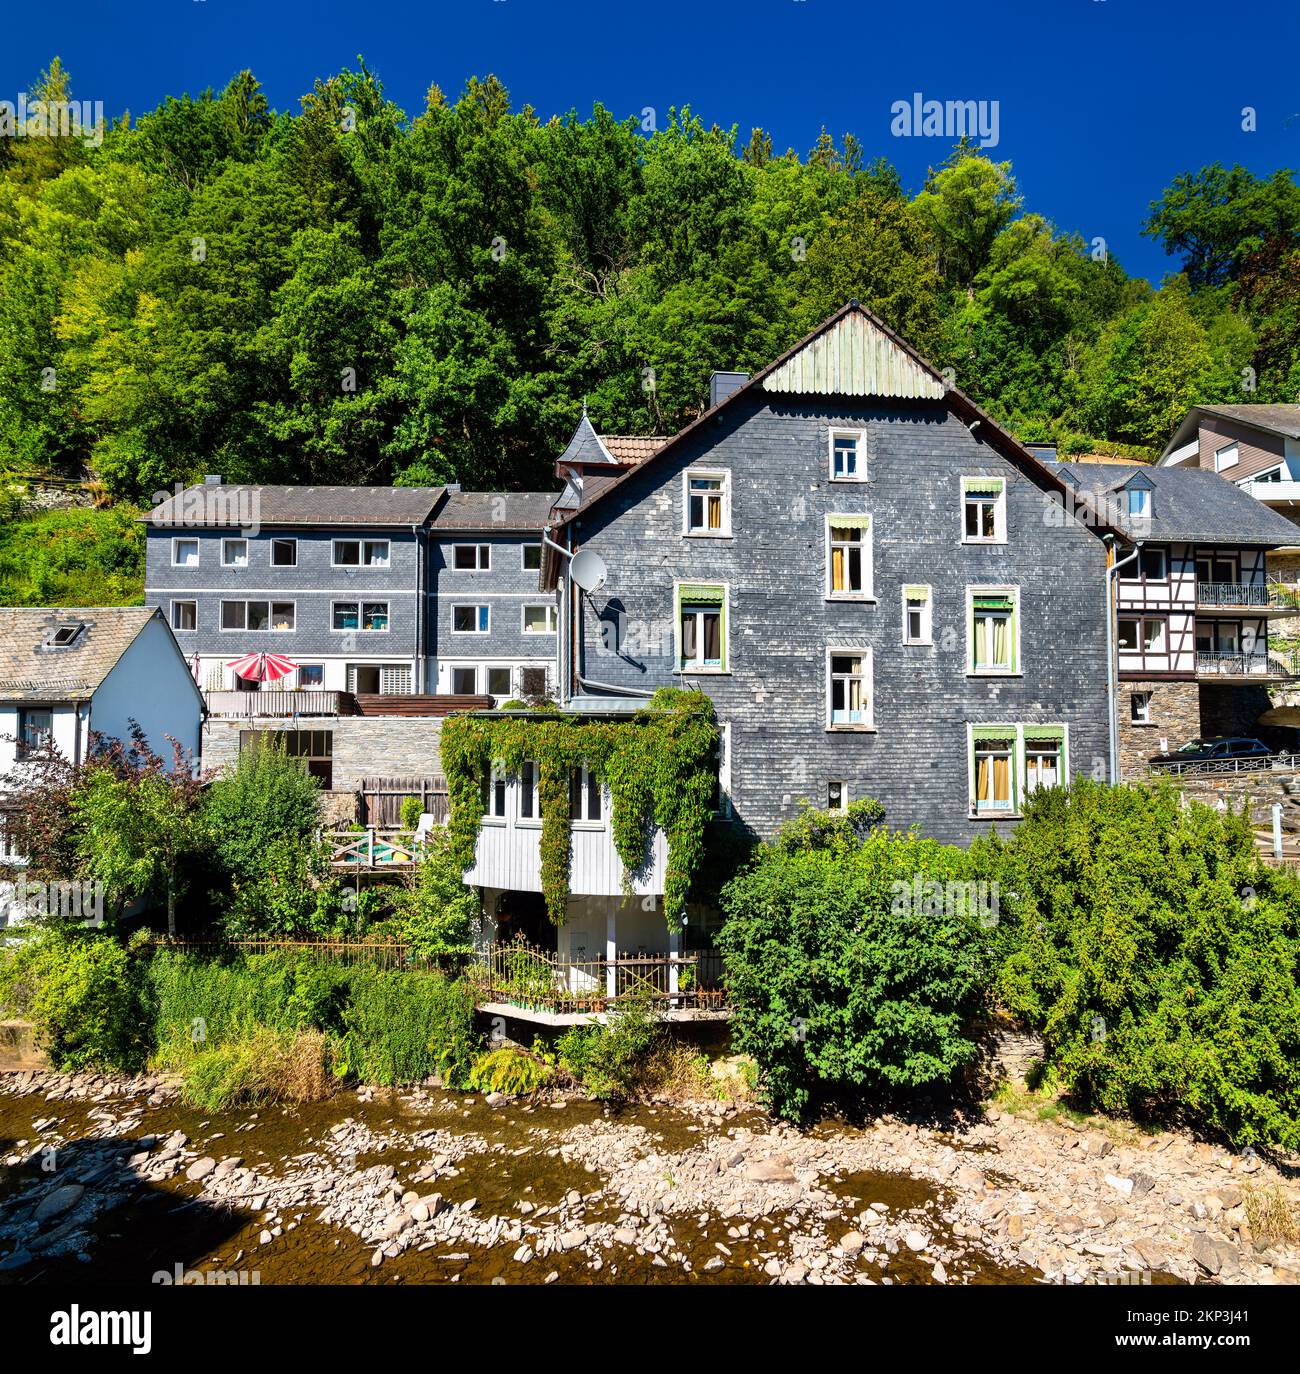 Monschau town above the Rur river in North Rhine-Westphalia, Germany Stock Photo